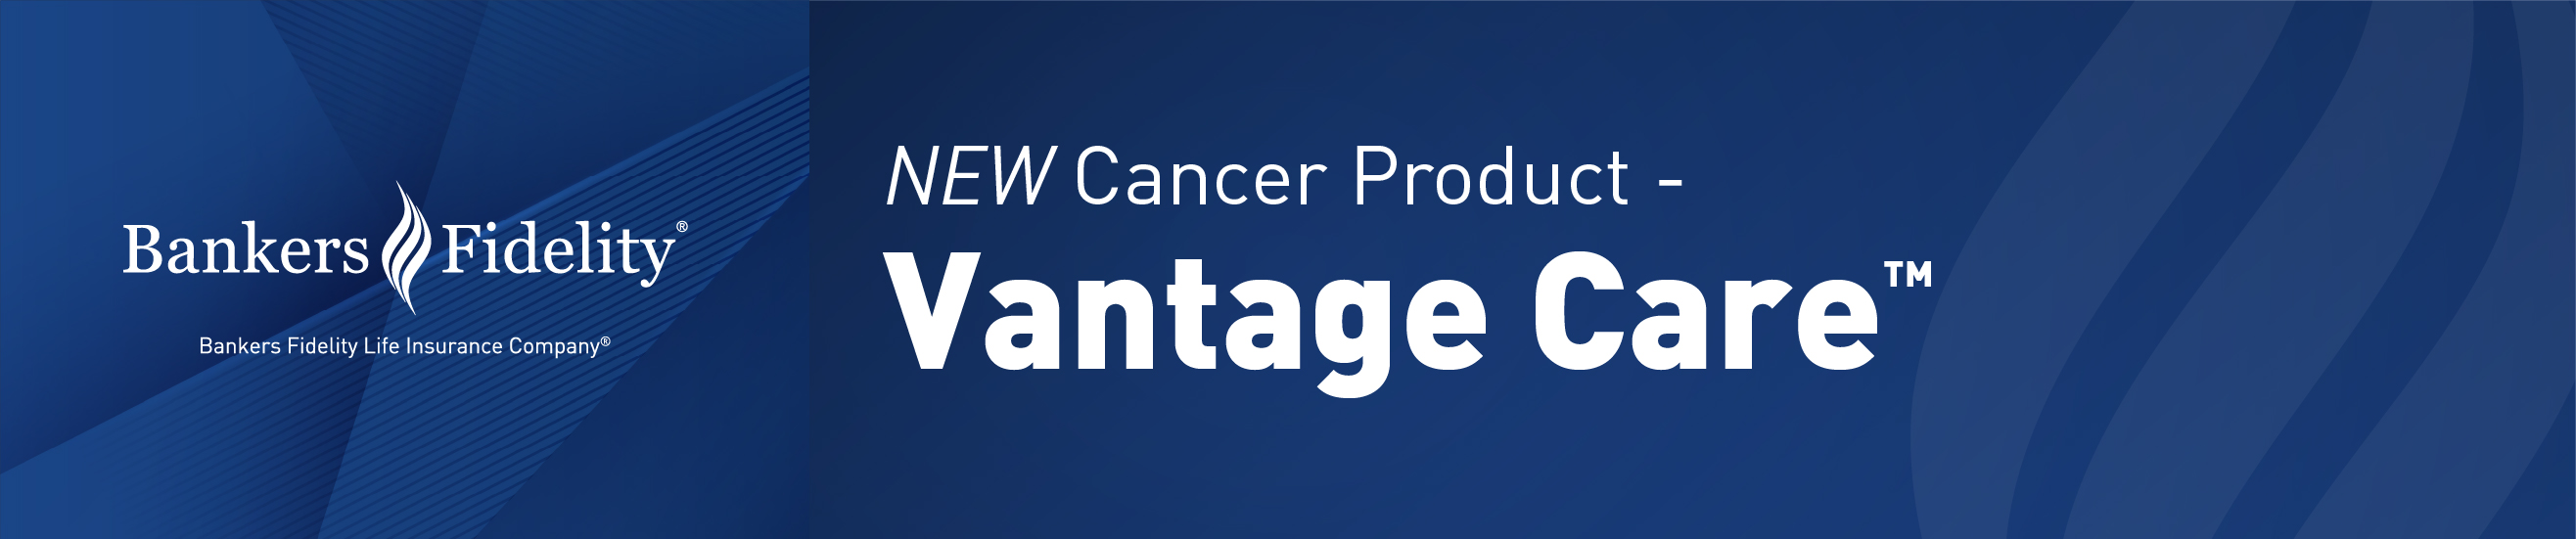 Cancer Care Product